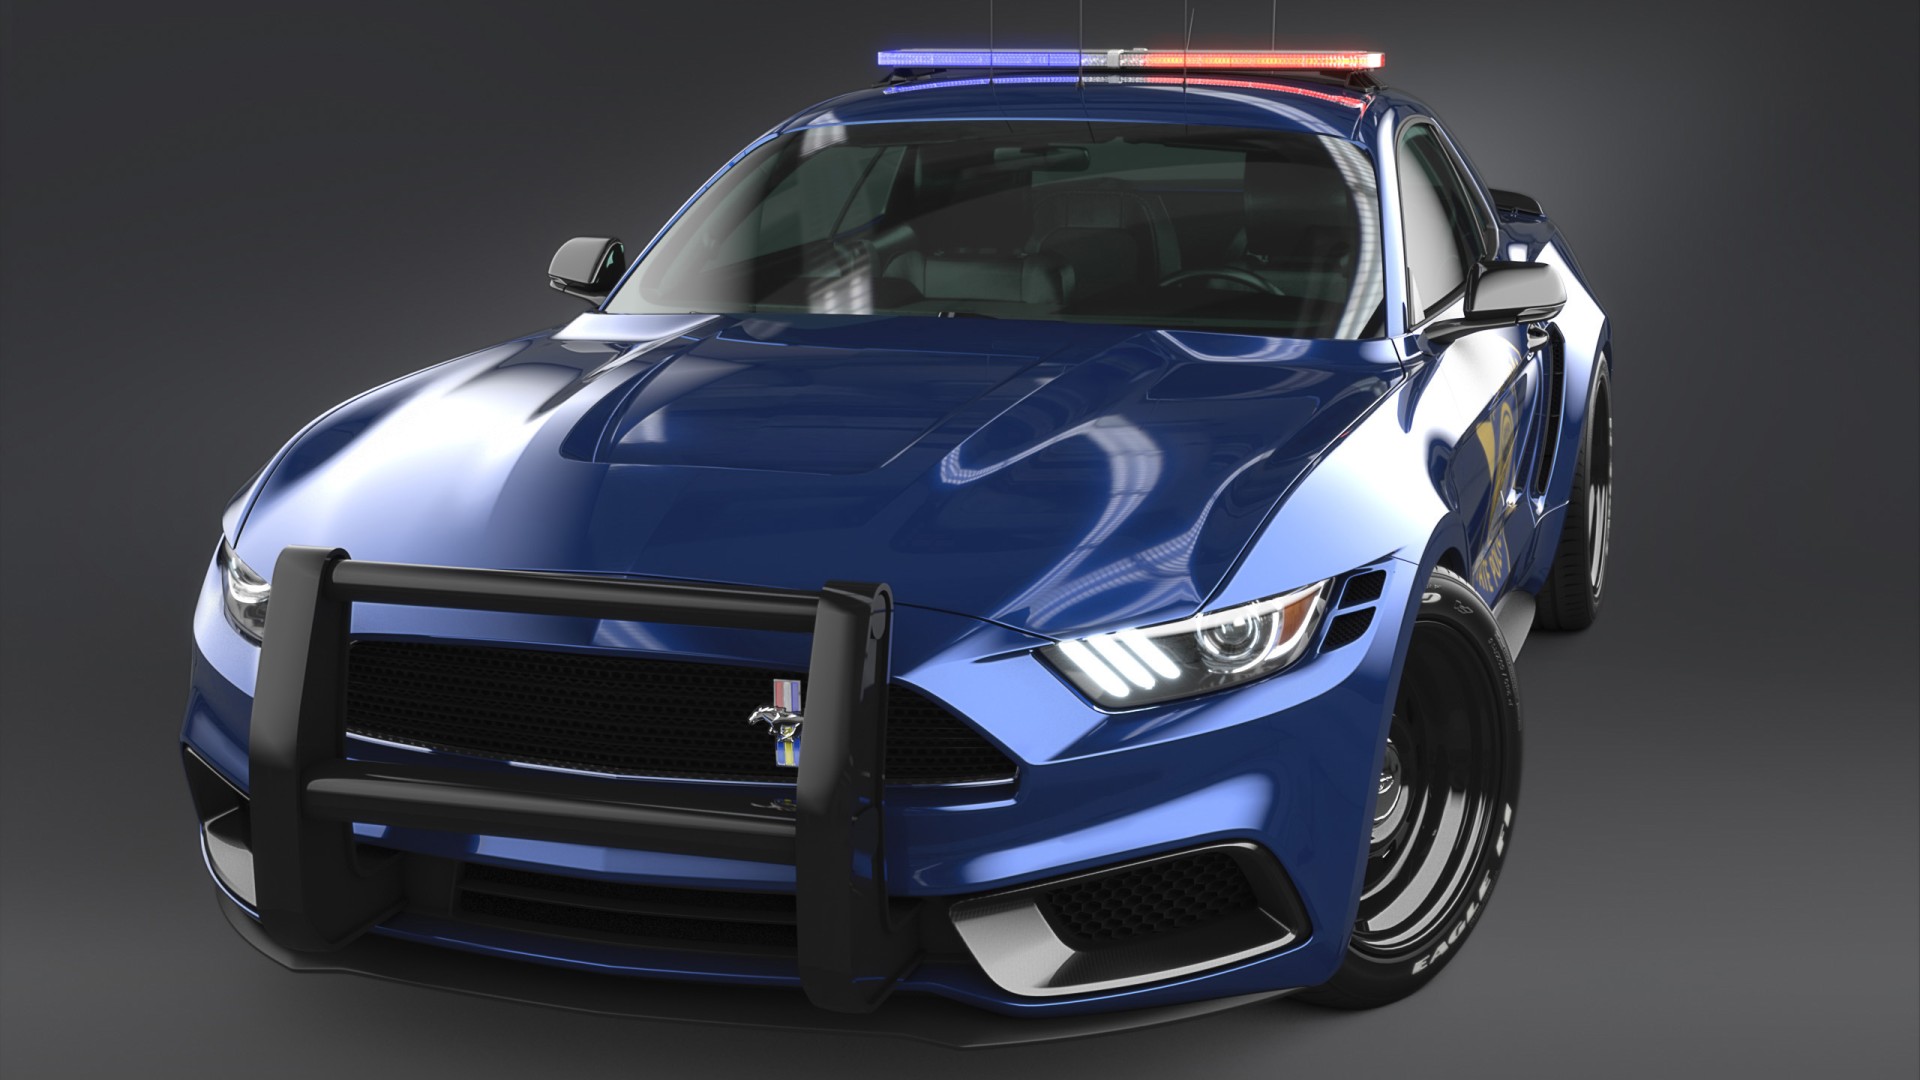 2017 Ford Mustang NotchBack Design Police 3 Wallpaper | HD Car Wallpapers | ID #7650